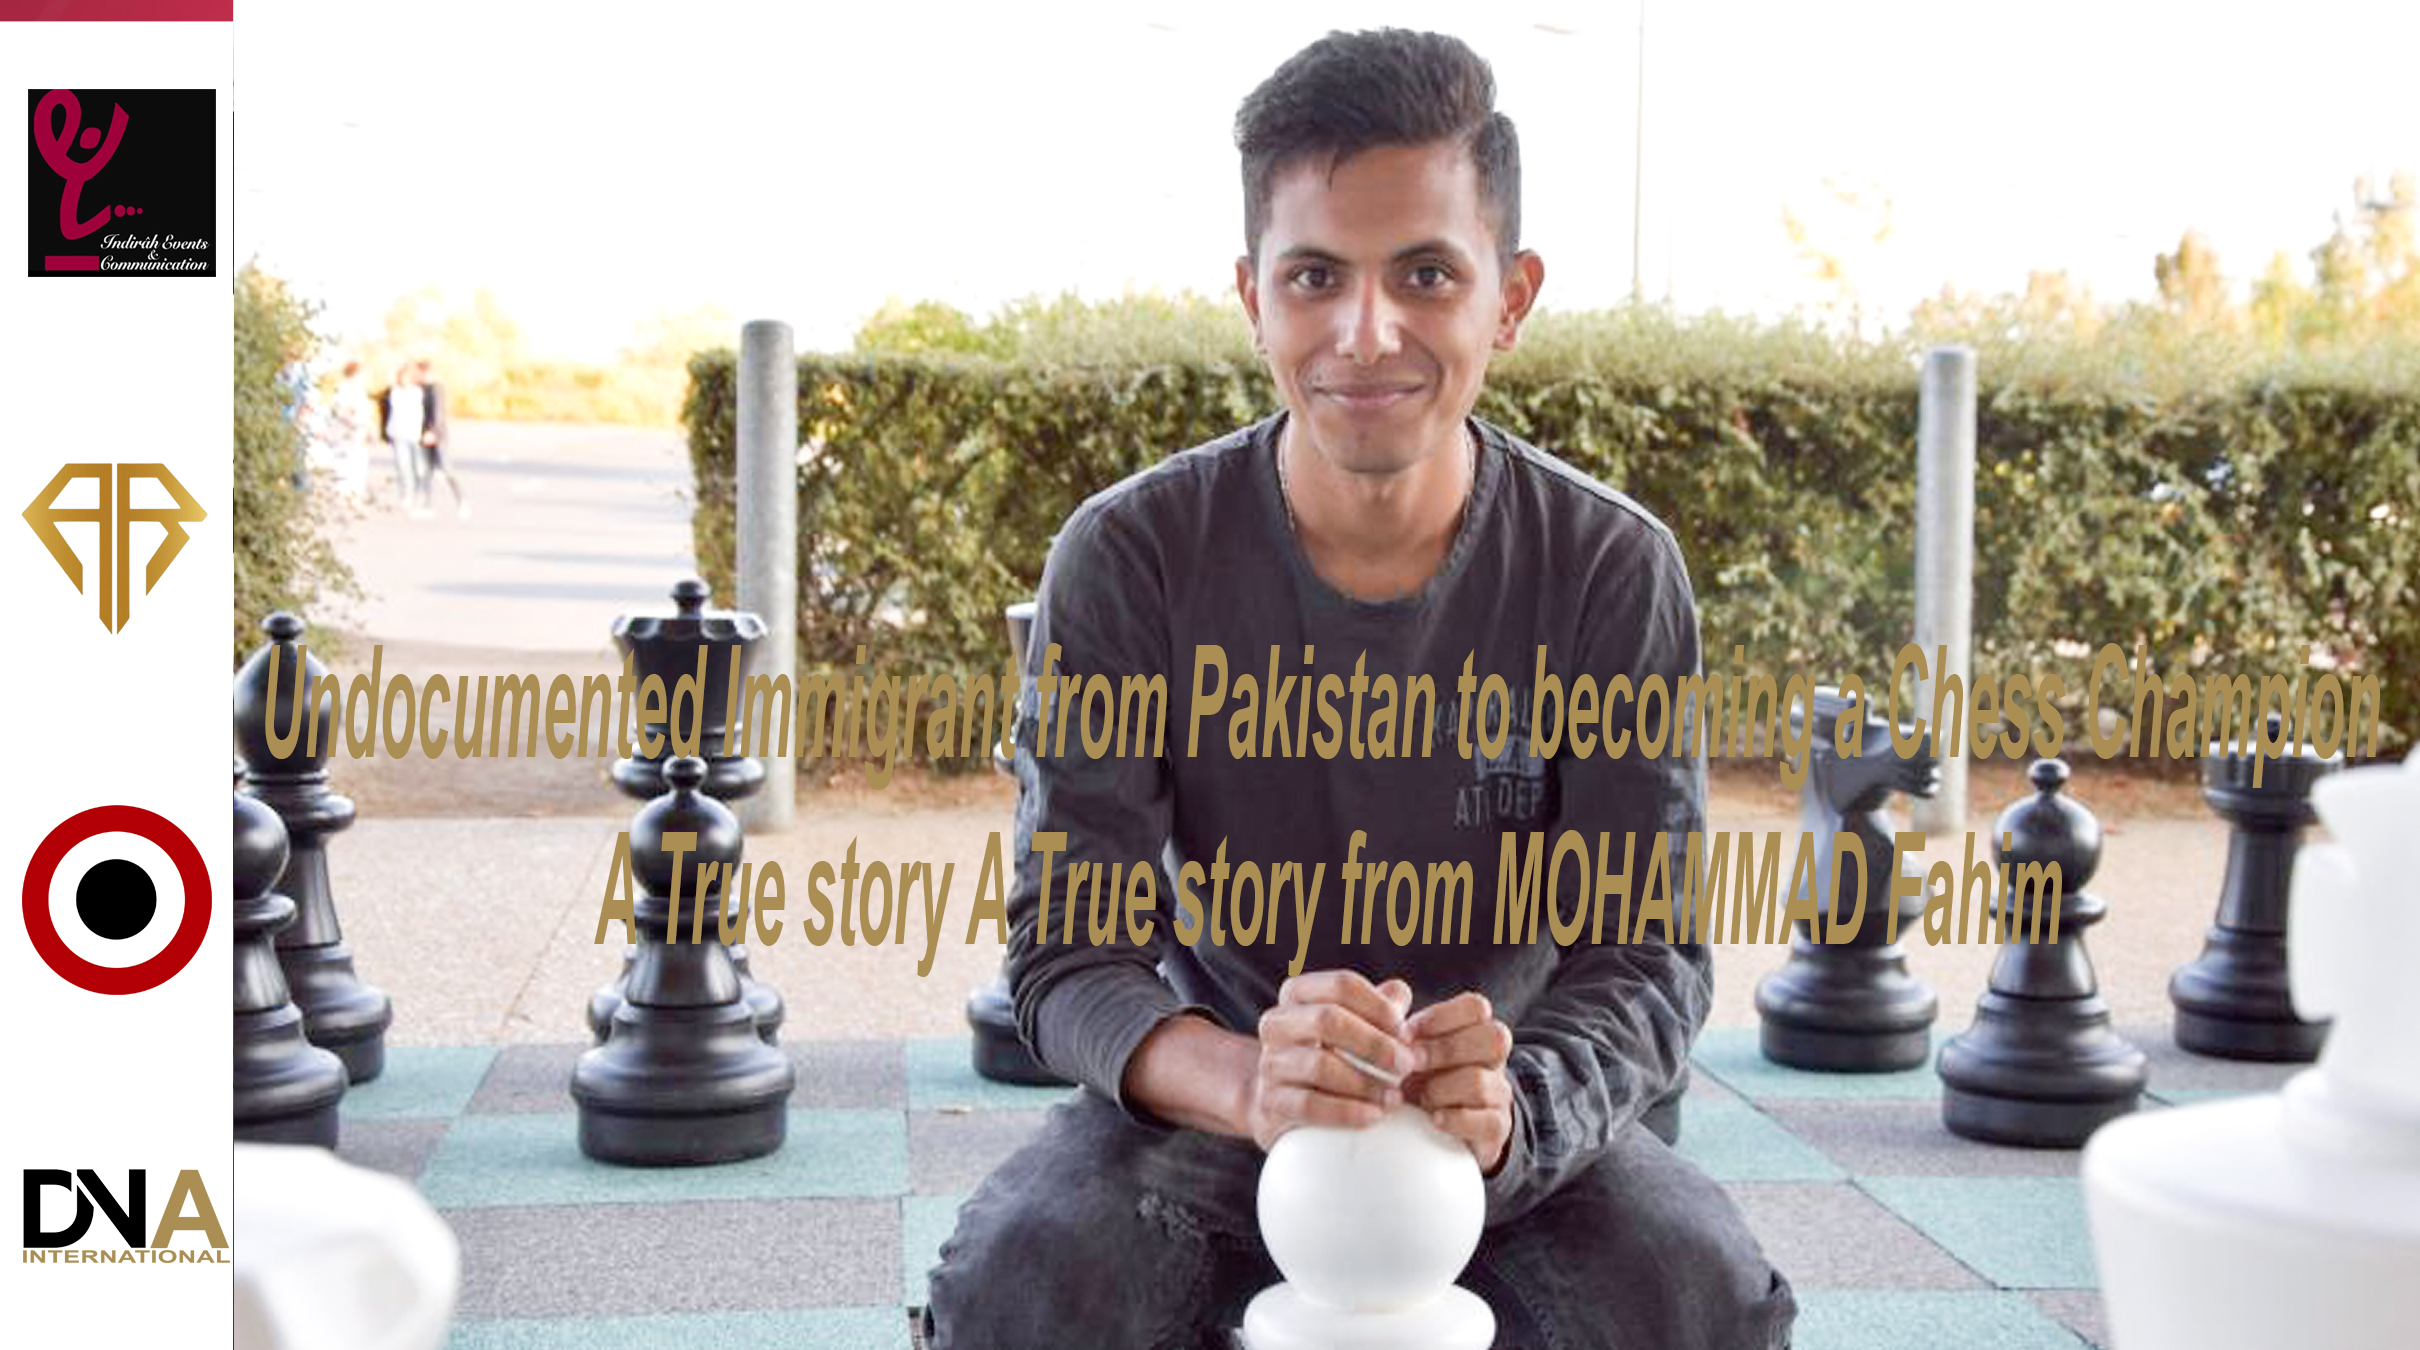 AFRICA-VOGUE-COVER-ndocumented-Immigrant-from-Pakistan-to-becoming-a-Chess-Champion--A-True-story-A-True-story-from-MOHAMMAD-Fahim-DN-AFRICA-MEDIA-PARTNER